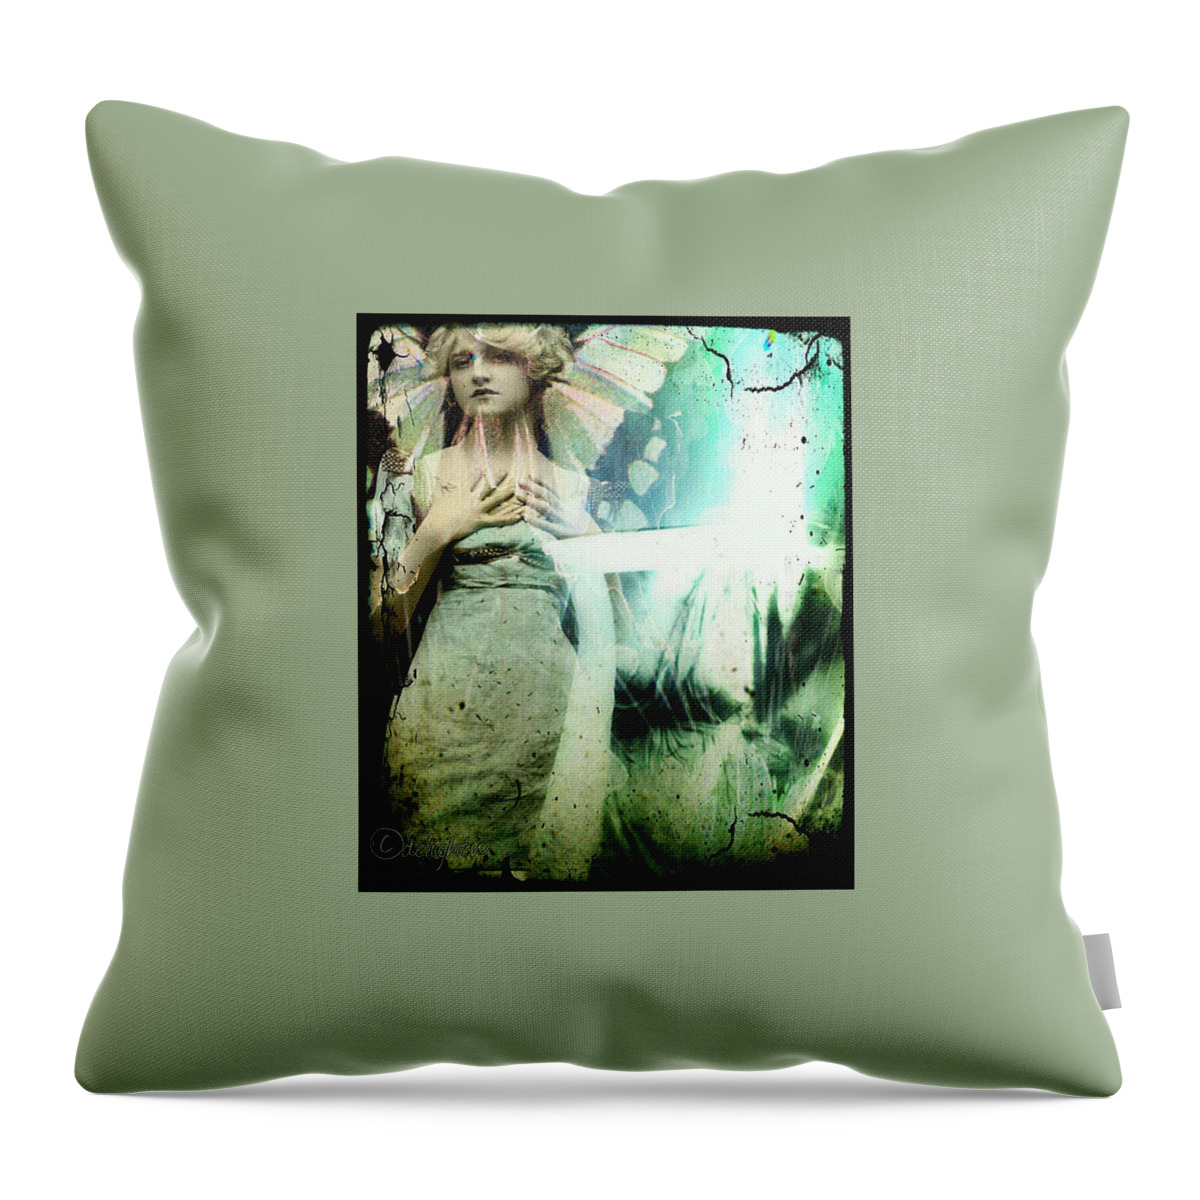 Woman Throw Pillow featuring the digital art In Her Dreams She Could Fly Unfettered by Delight Worthyn